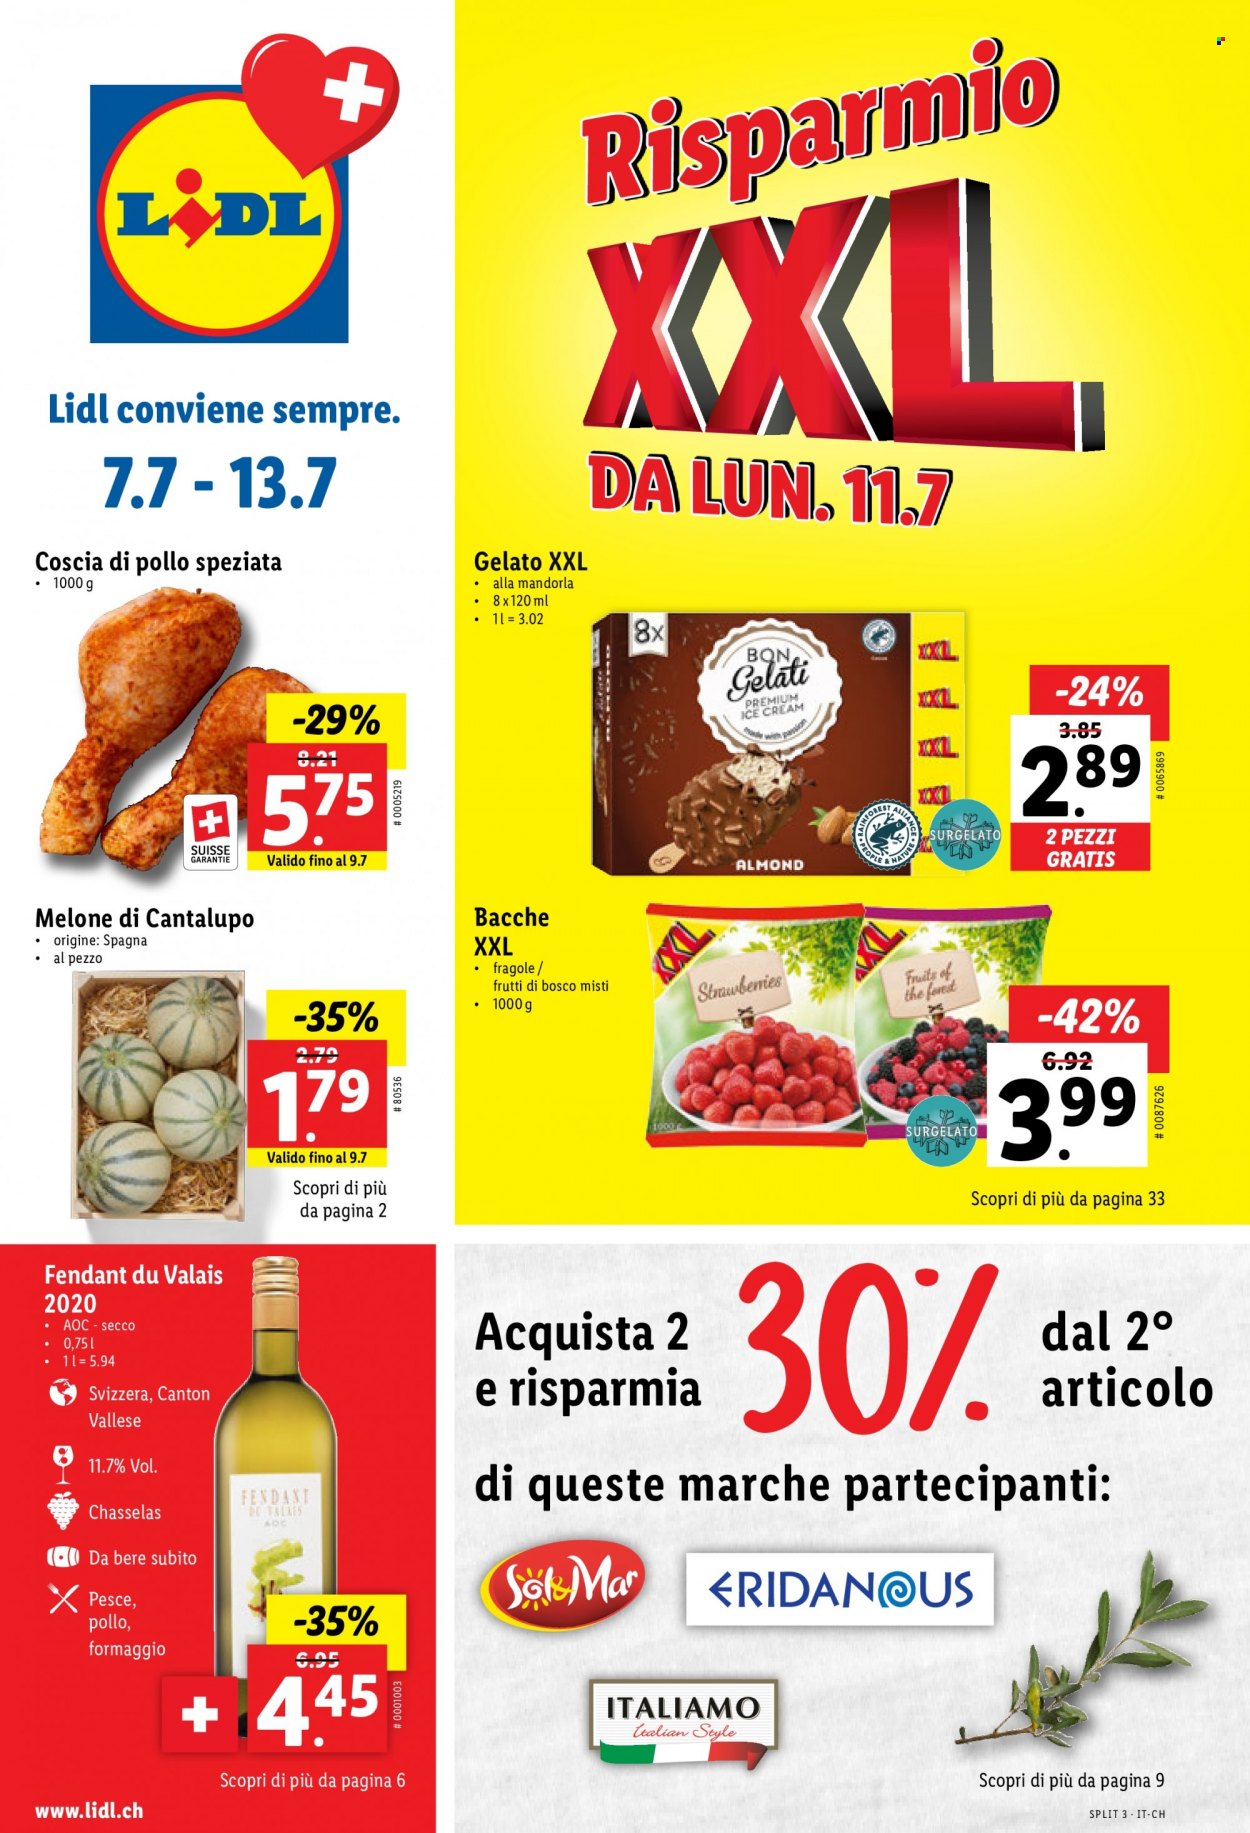 Catalogue Lidl - 7.7.2022 - 13.7.2022. Page 1.